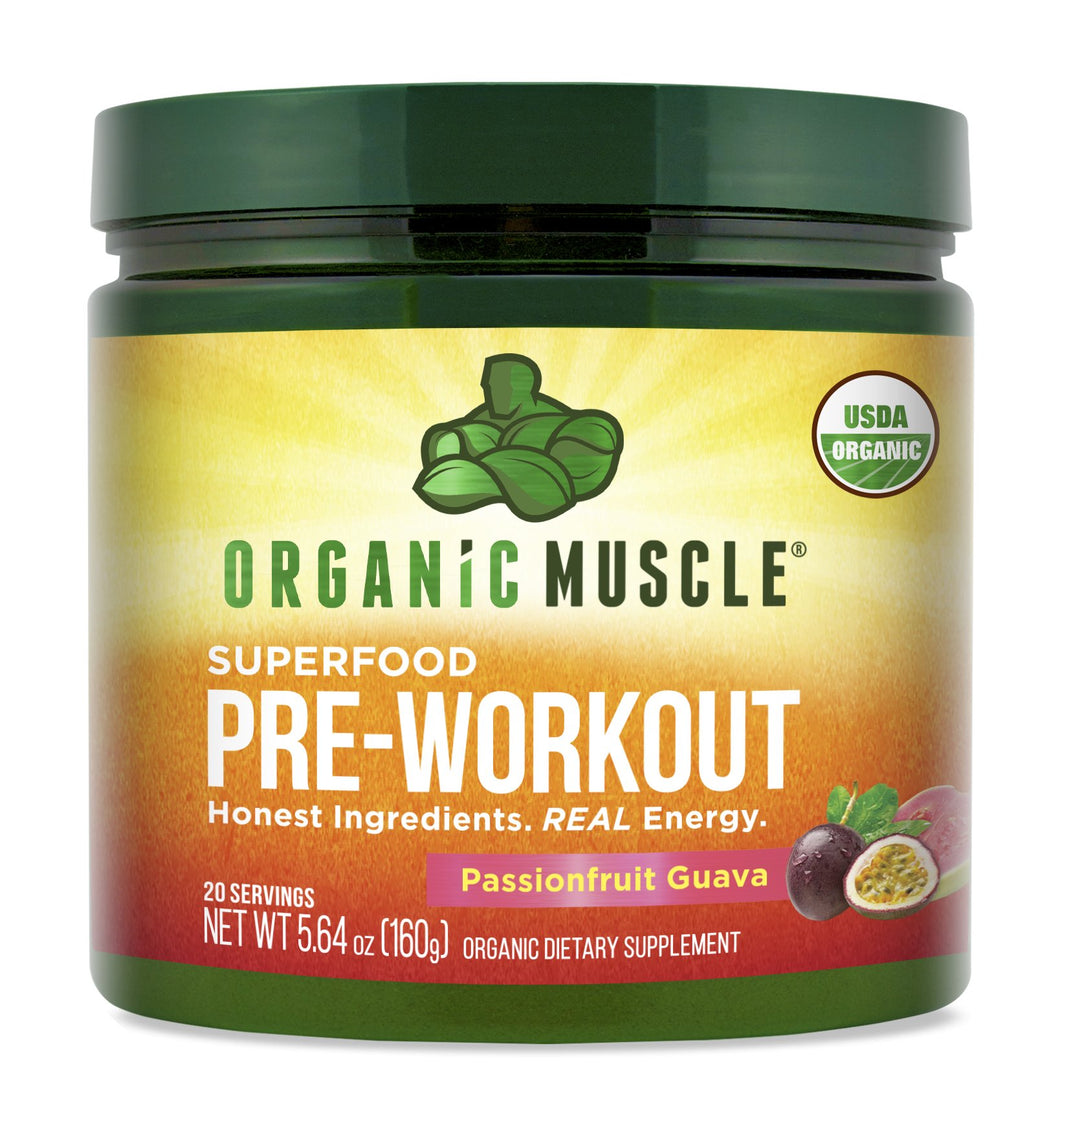 Pre Workout- Passionfruit Guava - Organic Muscle Fitness SupplementsOrganic Muscle SupplementsOrganic Muscle Fitness Supplements788454267193